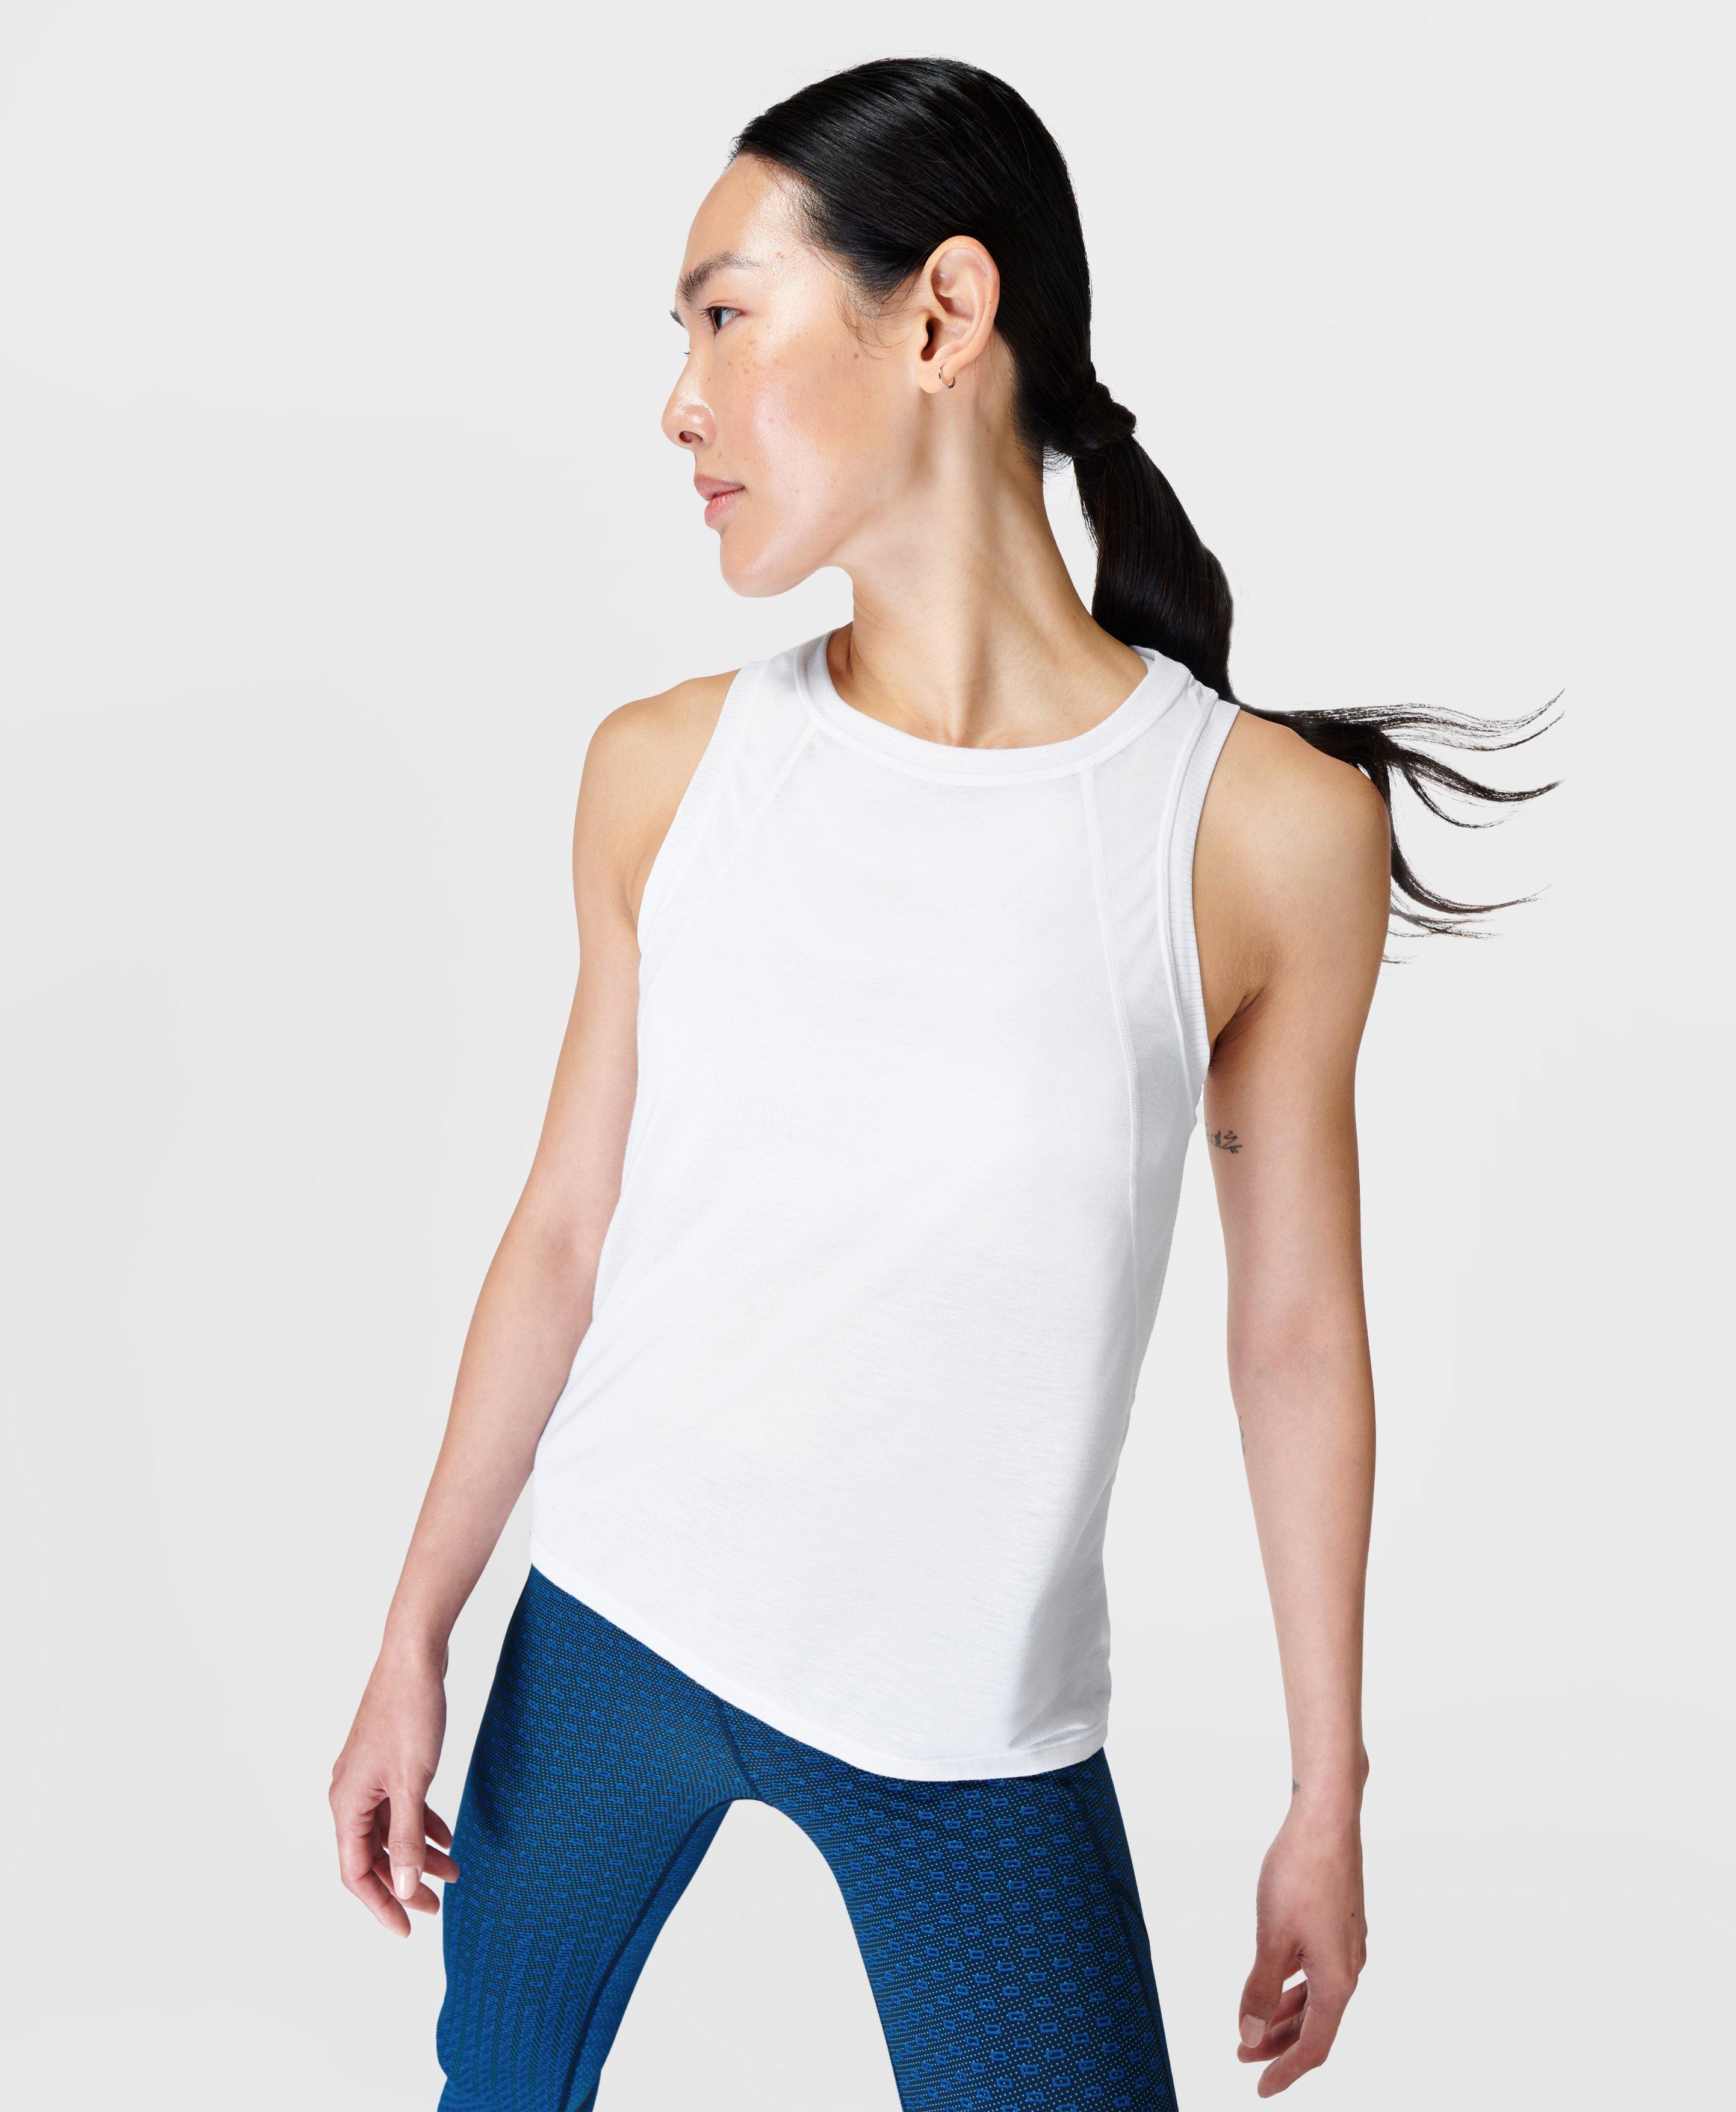 Sweaty Betty Sale Tops - Shop up to 60% off